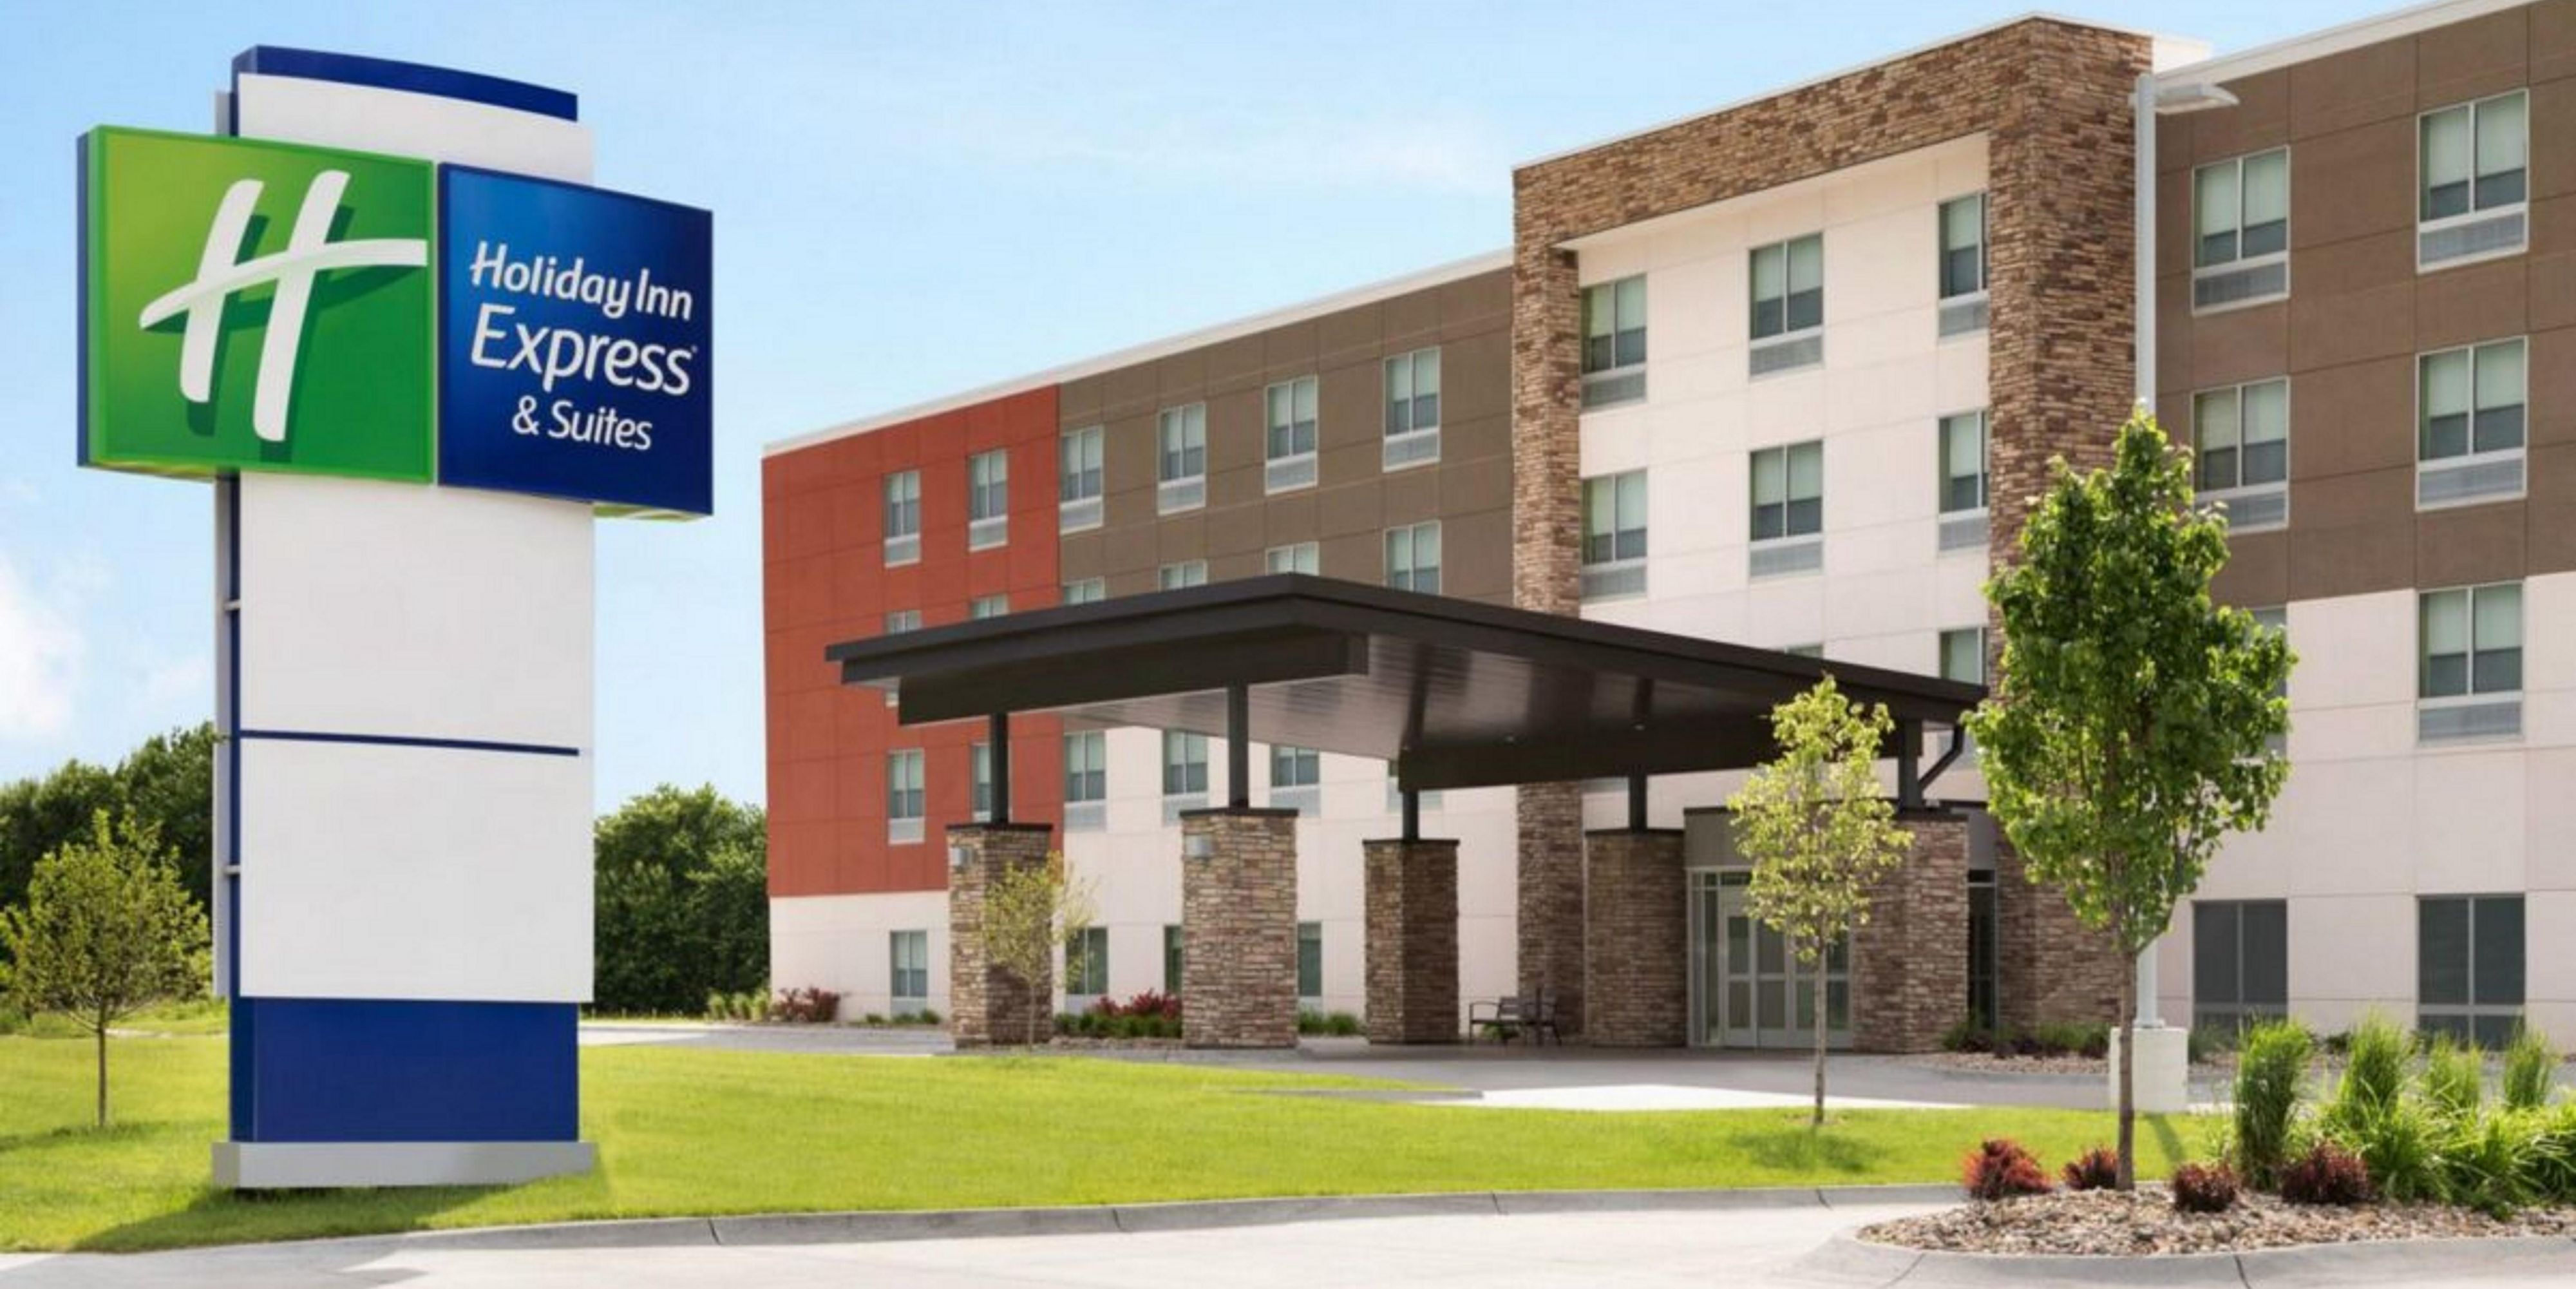 We are the newest IHG property in town. We are pleased to offer IHG's newest design solution Formula Blue™, which was created to meet the evolving needs of all travelers visiting and traveling through Watertown. Come check out our new product!